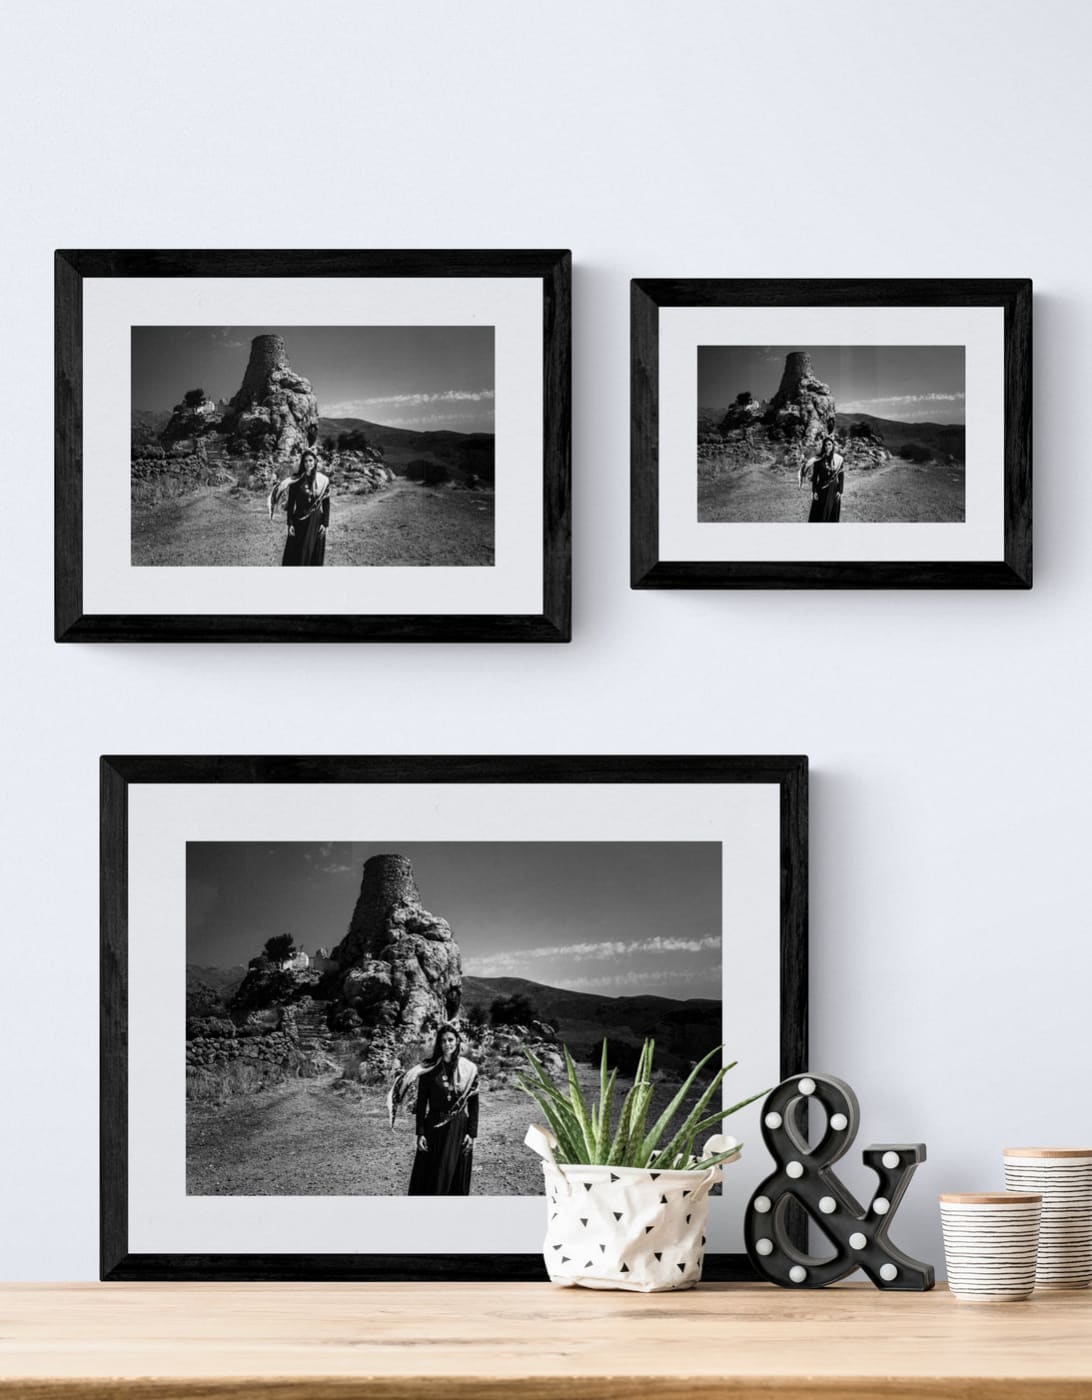 Black and White Photography Wall Art Greece | Castle Kalymnos Dodecanese by George Tatakis - framing options